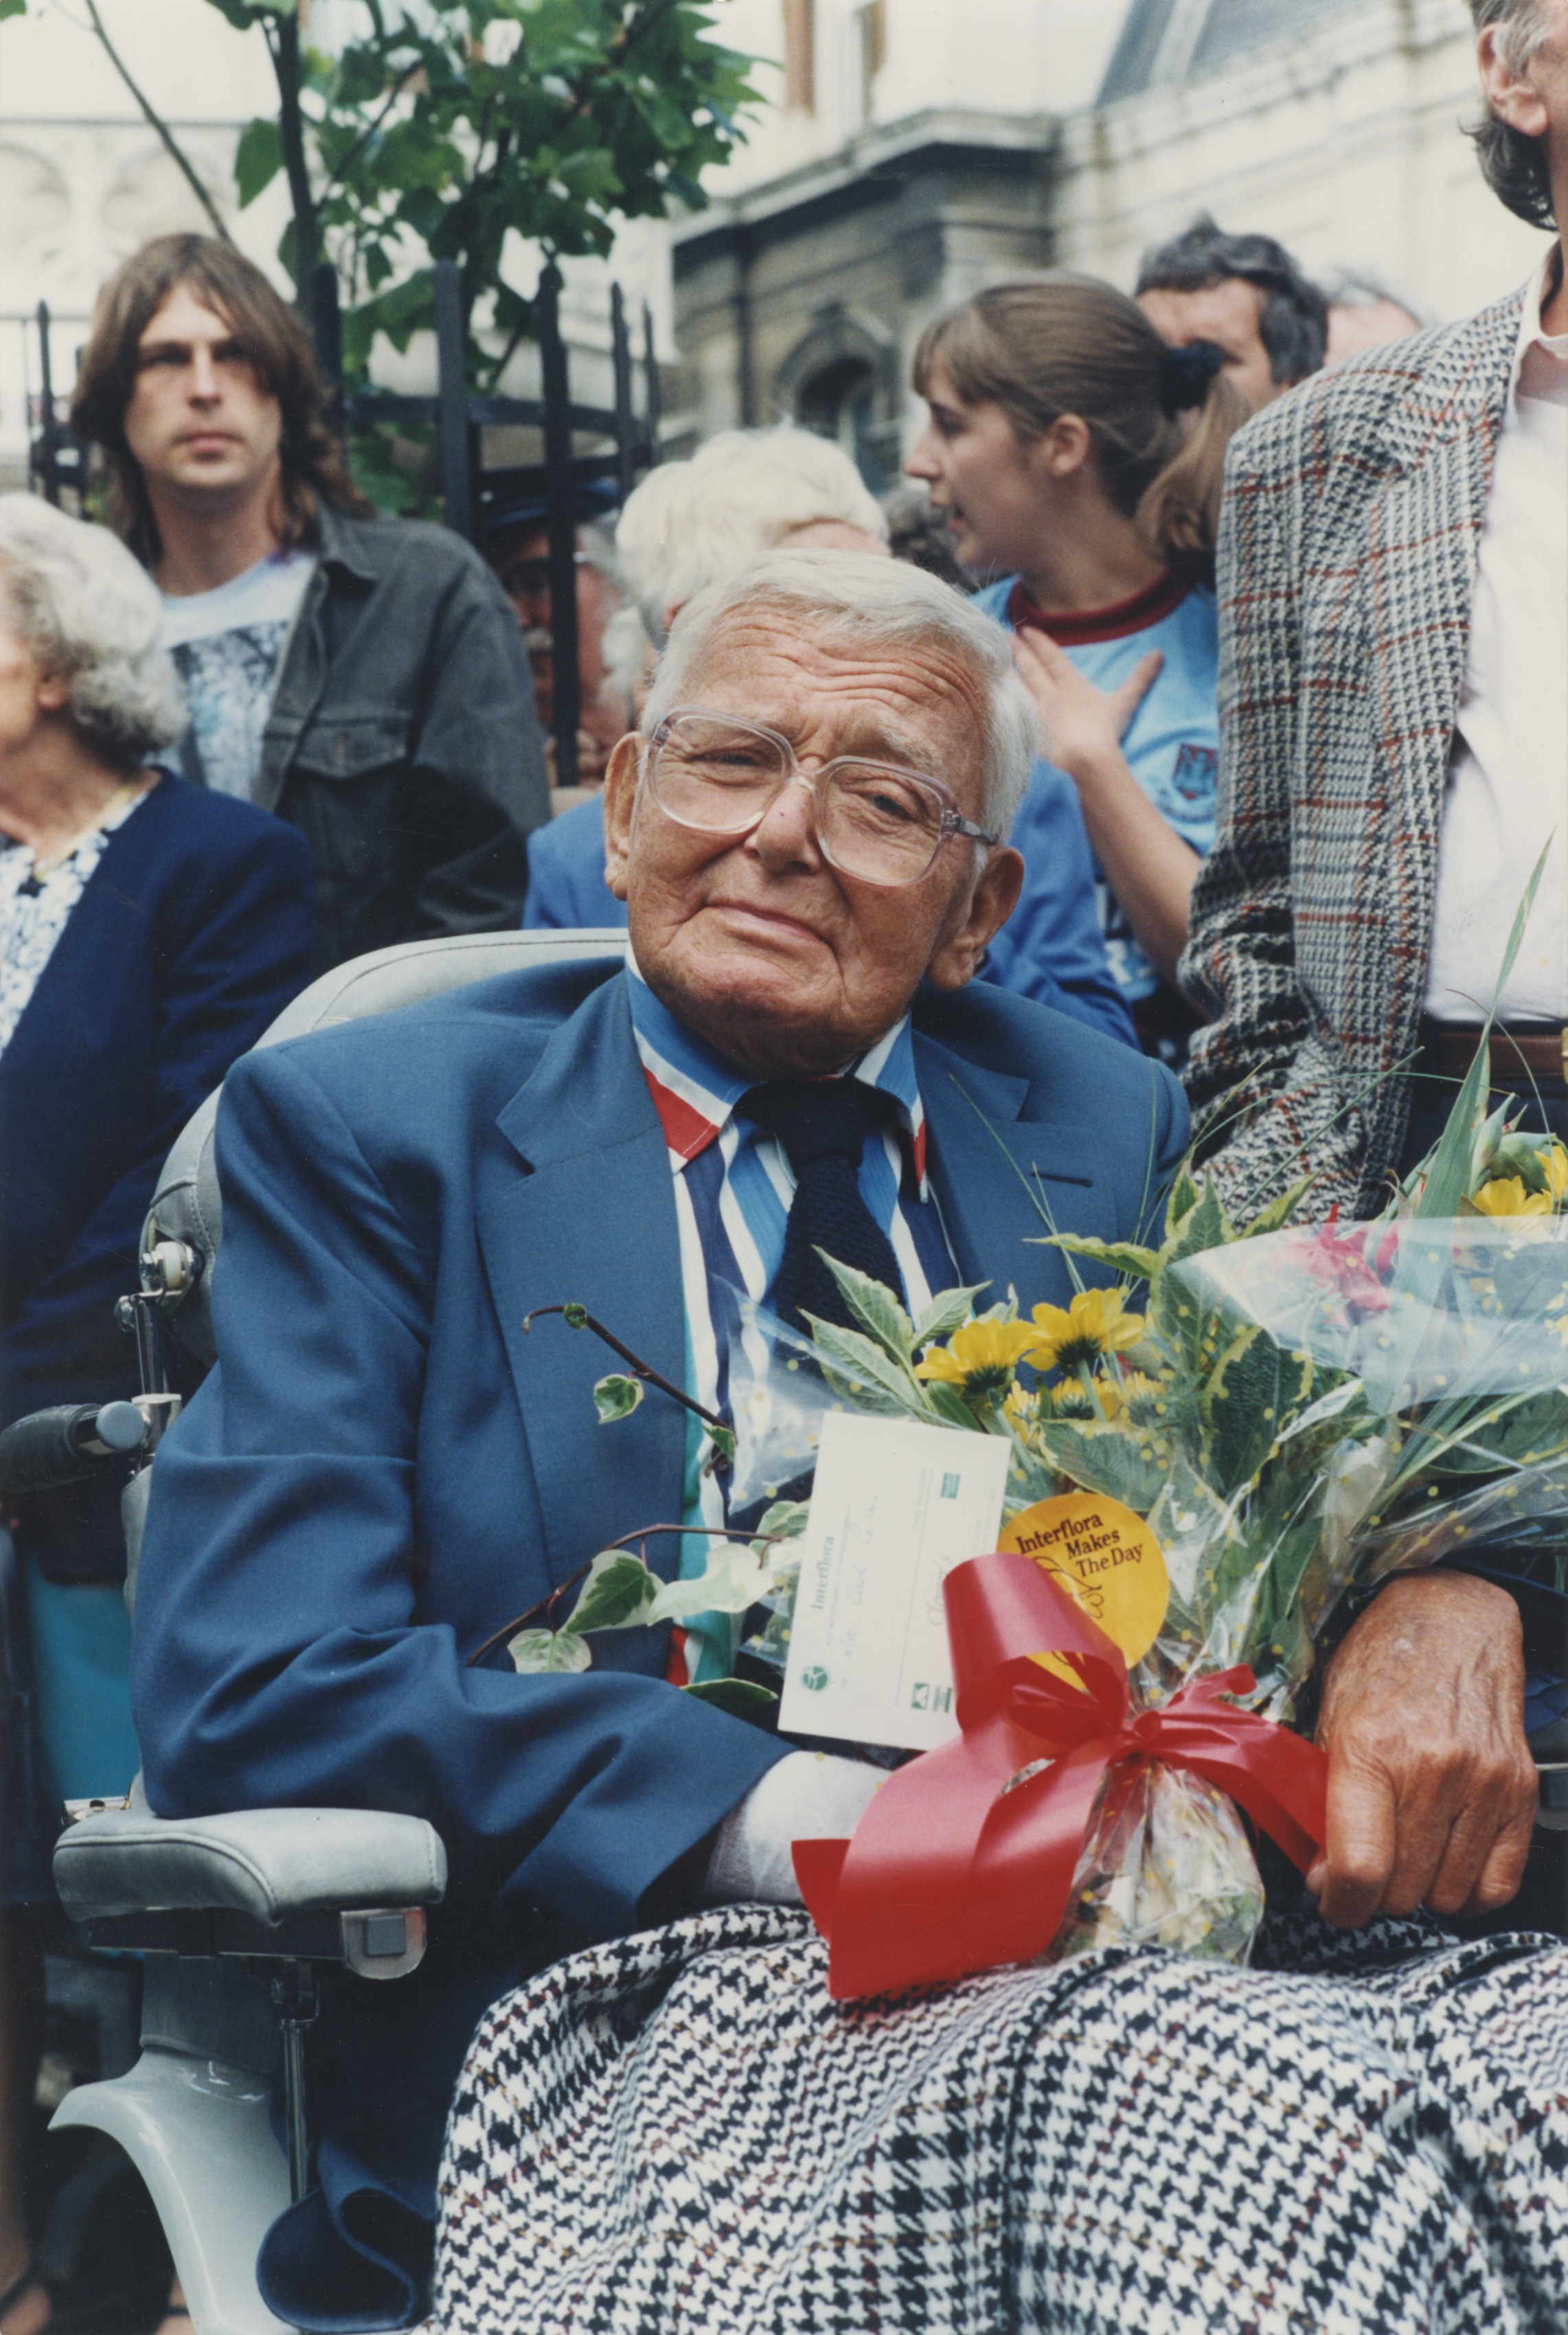 Colour photo of Giles at the unveiling of the Grandma statue in Ipswich - East Anglian Daily Times, September 1993 (Image ref: GAPH00429)